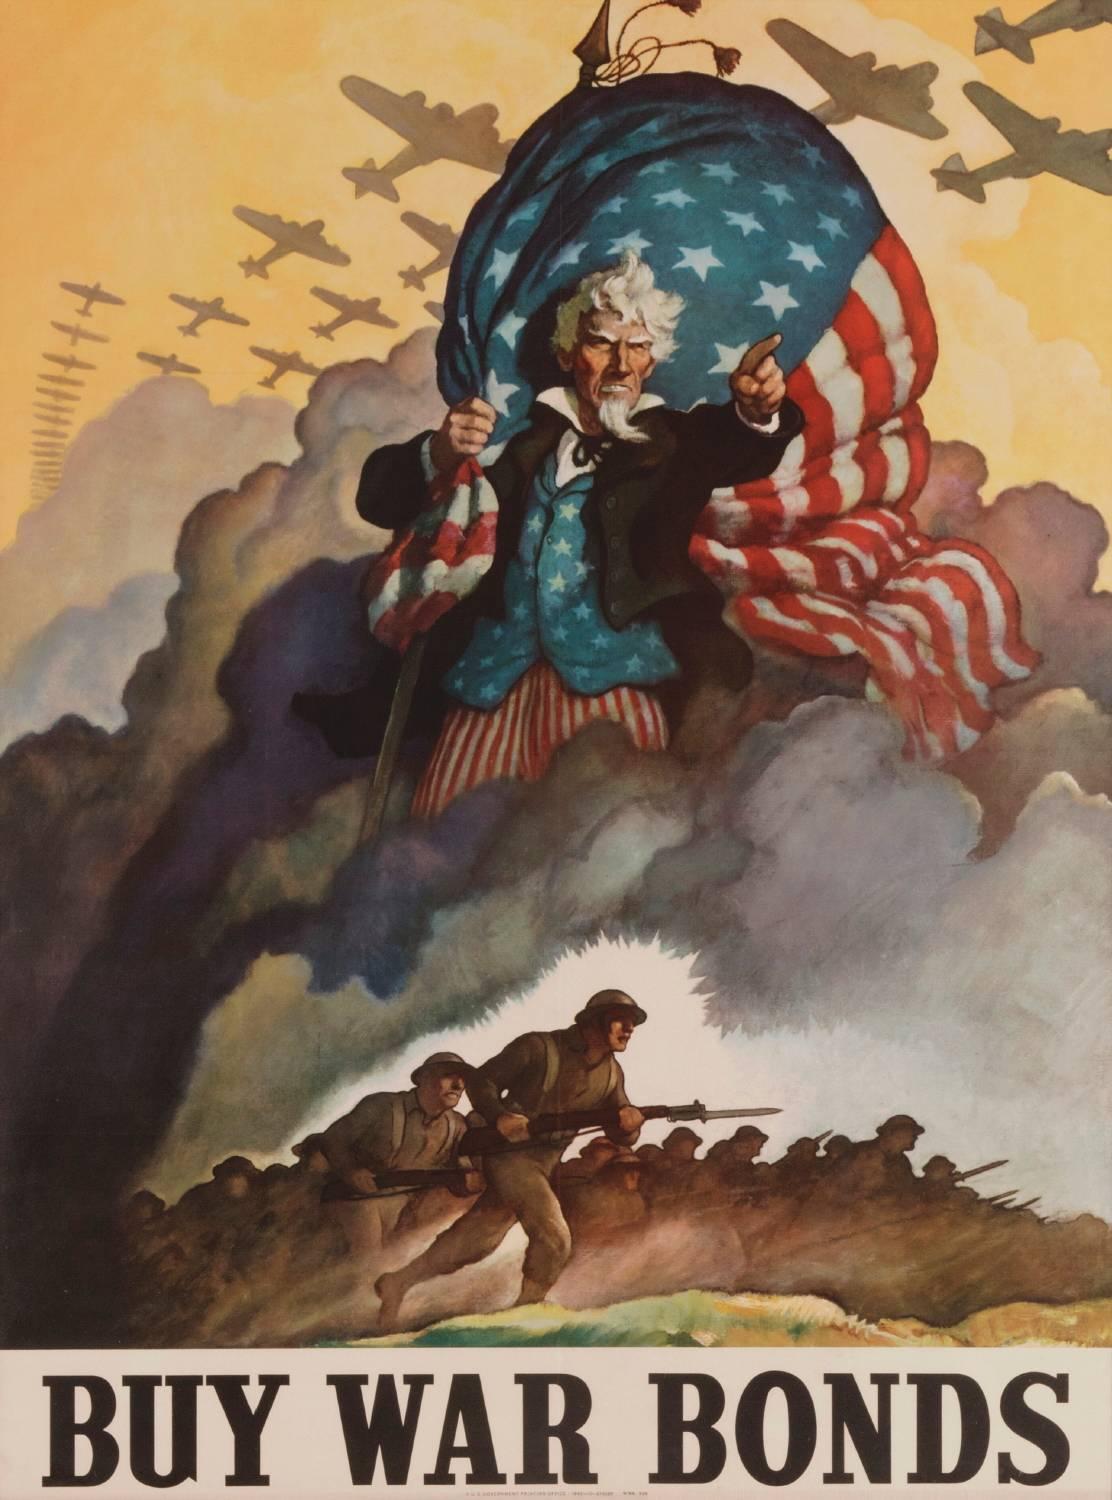 Striking and rare WWII poster by N.C. Wyeth, in the largest and rarest of three known sizes, with a windswept image of a fervent uncle Sam directing American troops to the fight: While James Montgomery Flagg may have painted the most famous version